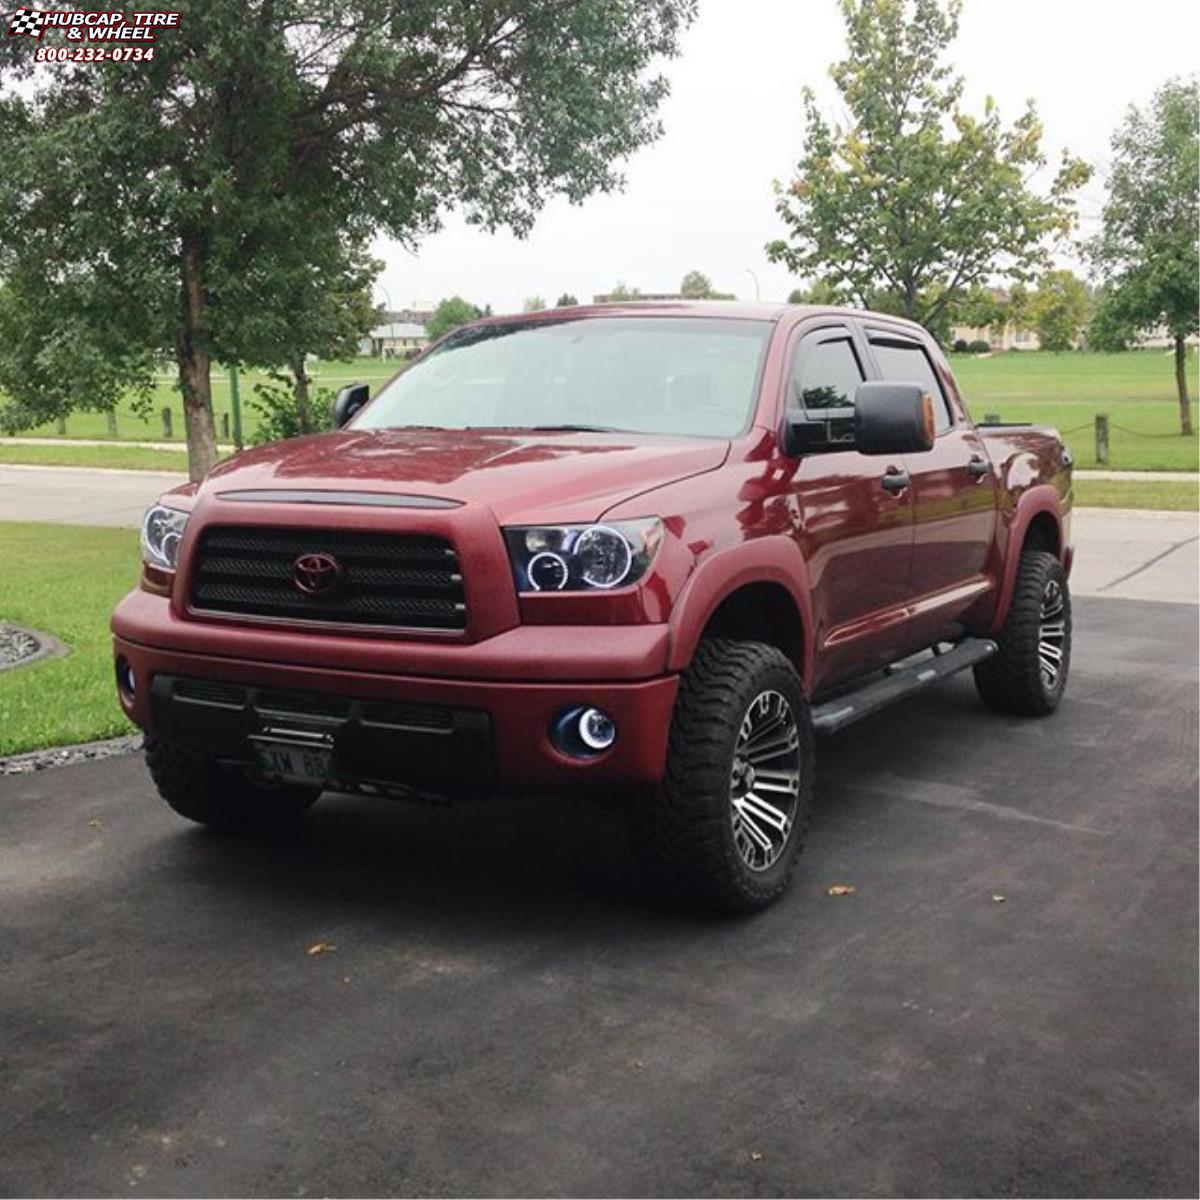 vehicle gallery/2009 toyota tundra xd series xd810 brigade  Gloss Black Machined Face wheels and rims